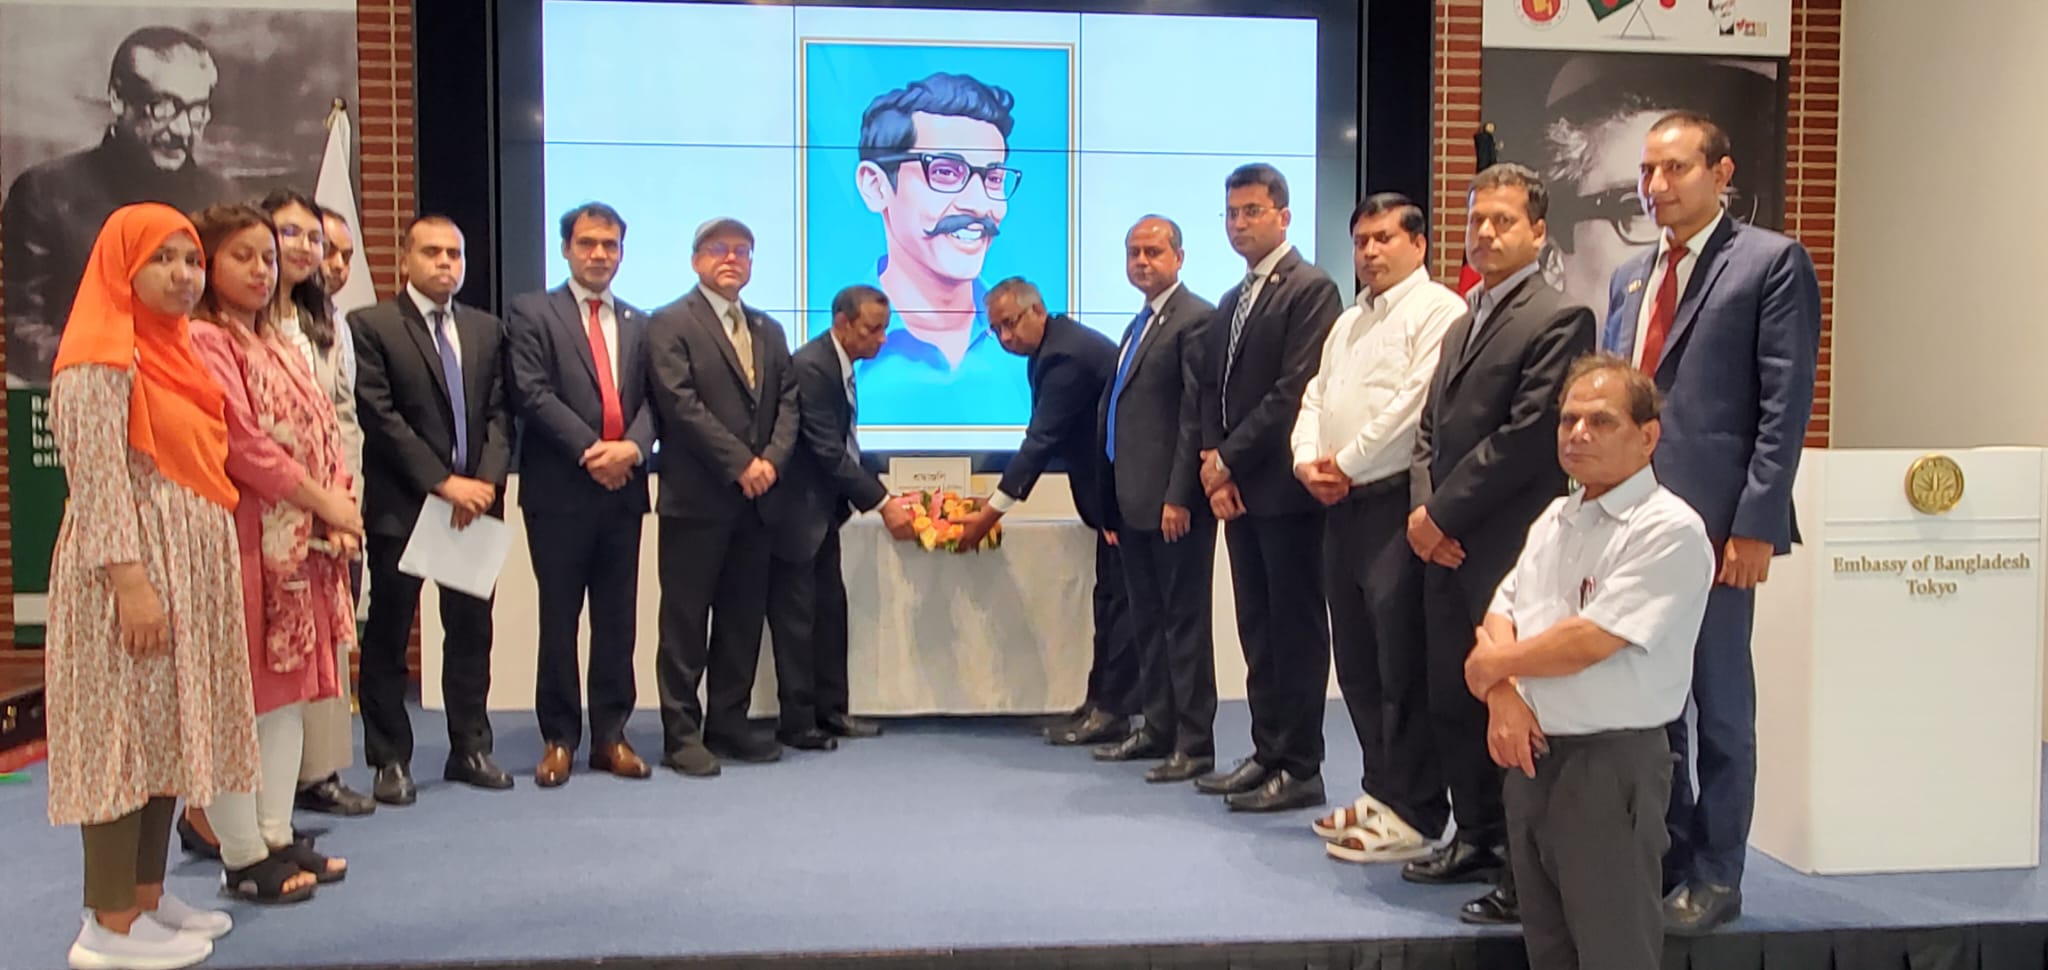 Bangladesh Embassy, Tokyo observed the 74th Birth Anniversary of the valiant Freedom Fighter Shaheed Captain Sheikh Kamal